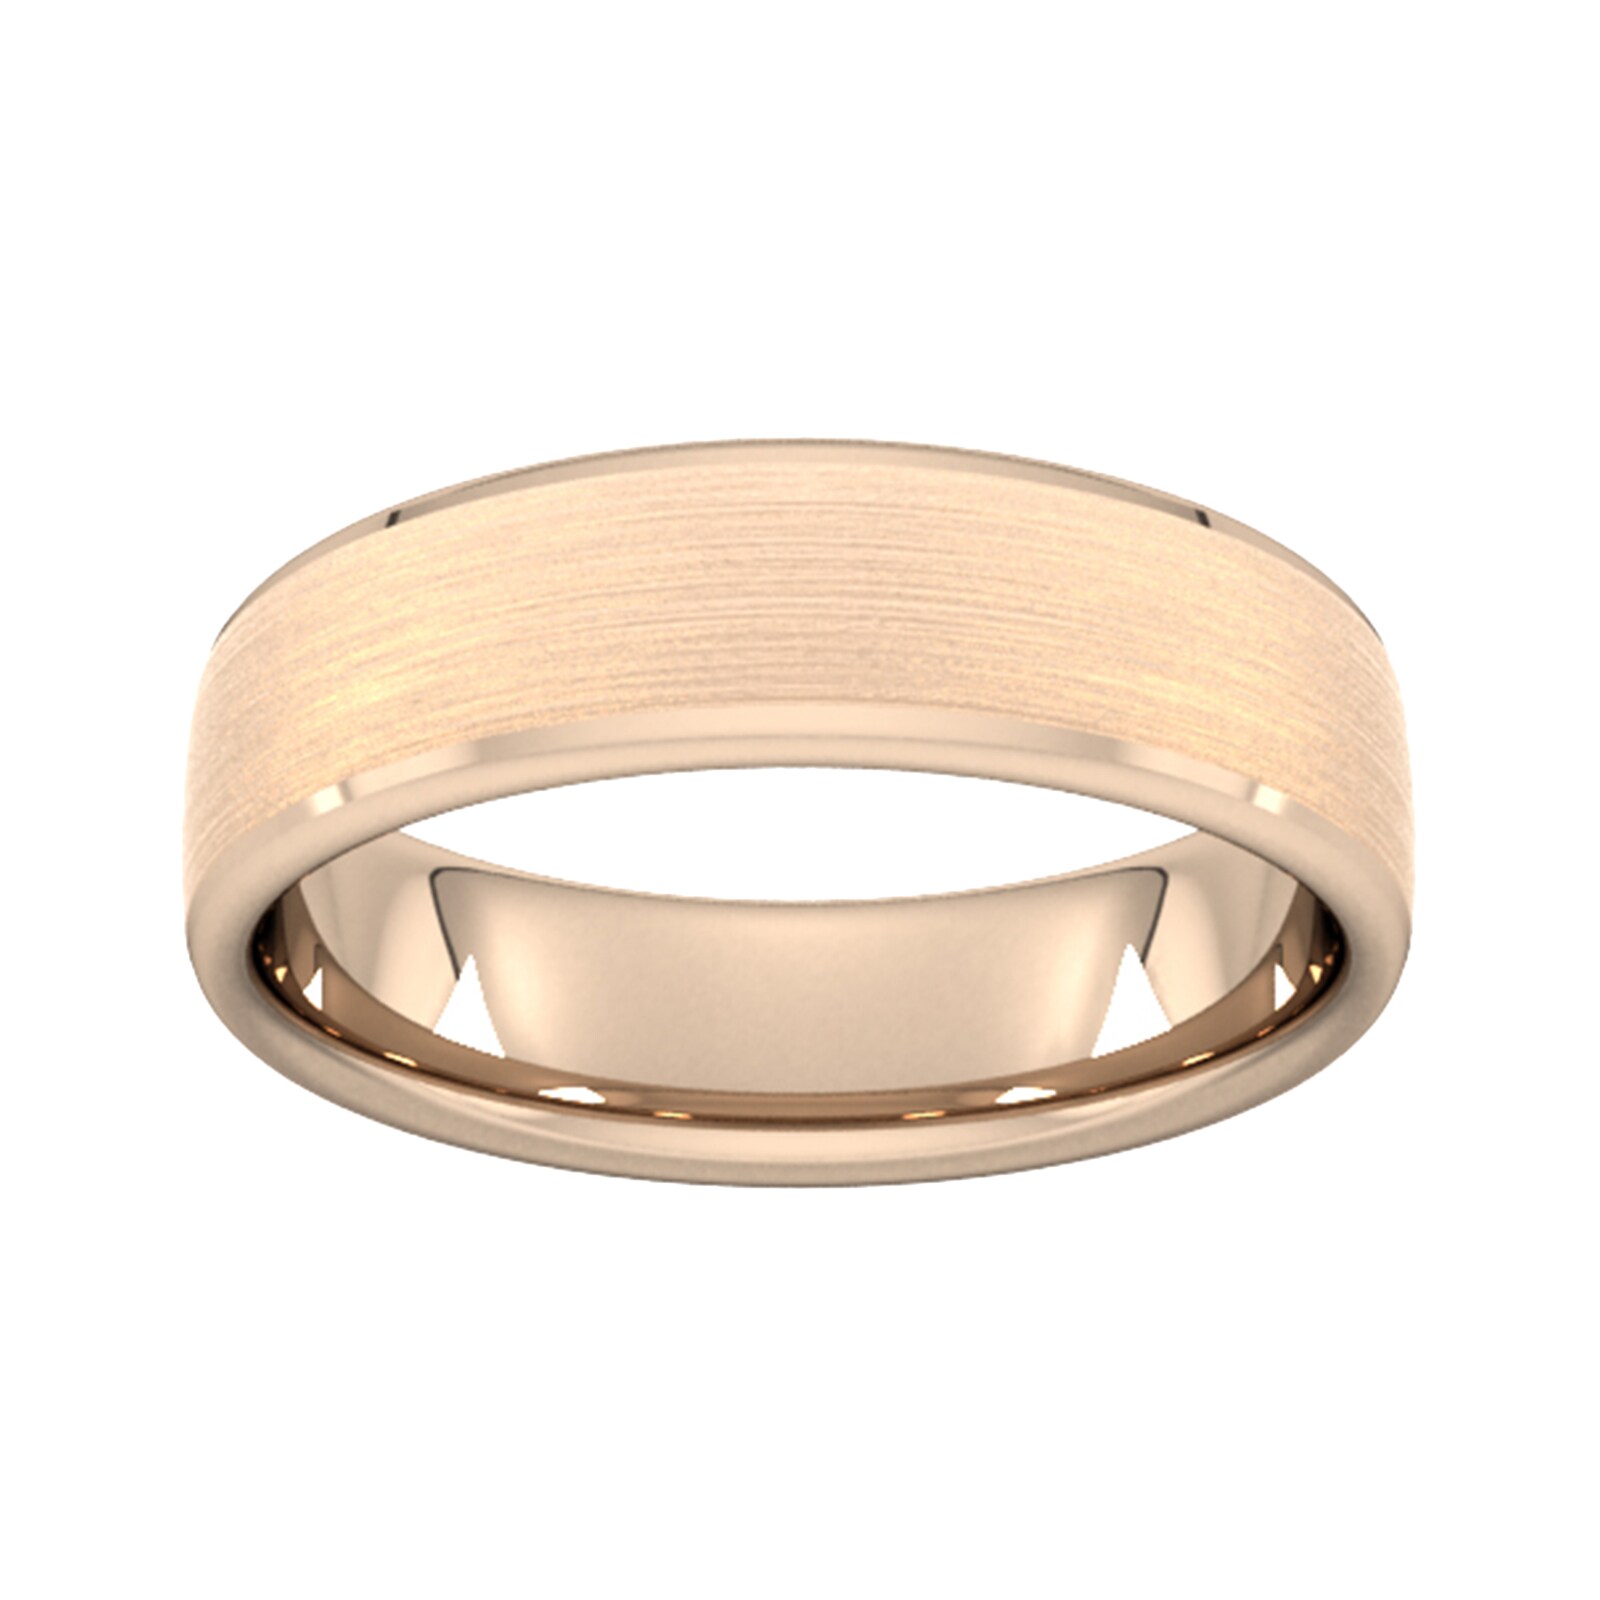 6mm Flat Court Heavy Polished Chamfered Edges With Matt Centre Wedding Ring In 18 Carat Rose Gold - Ring Size J